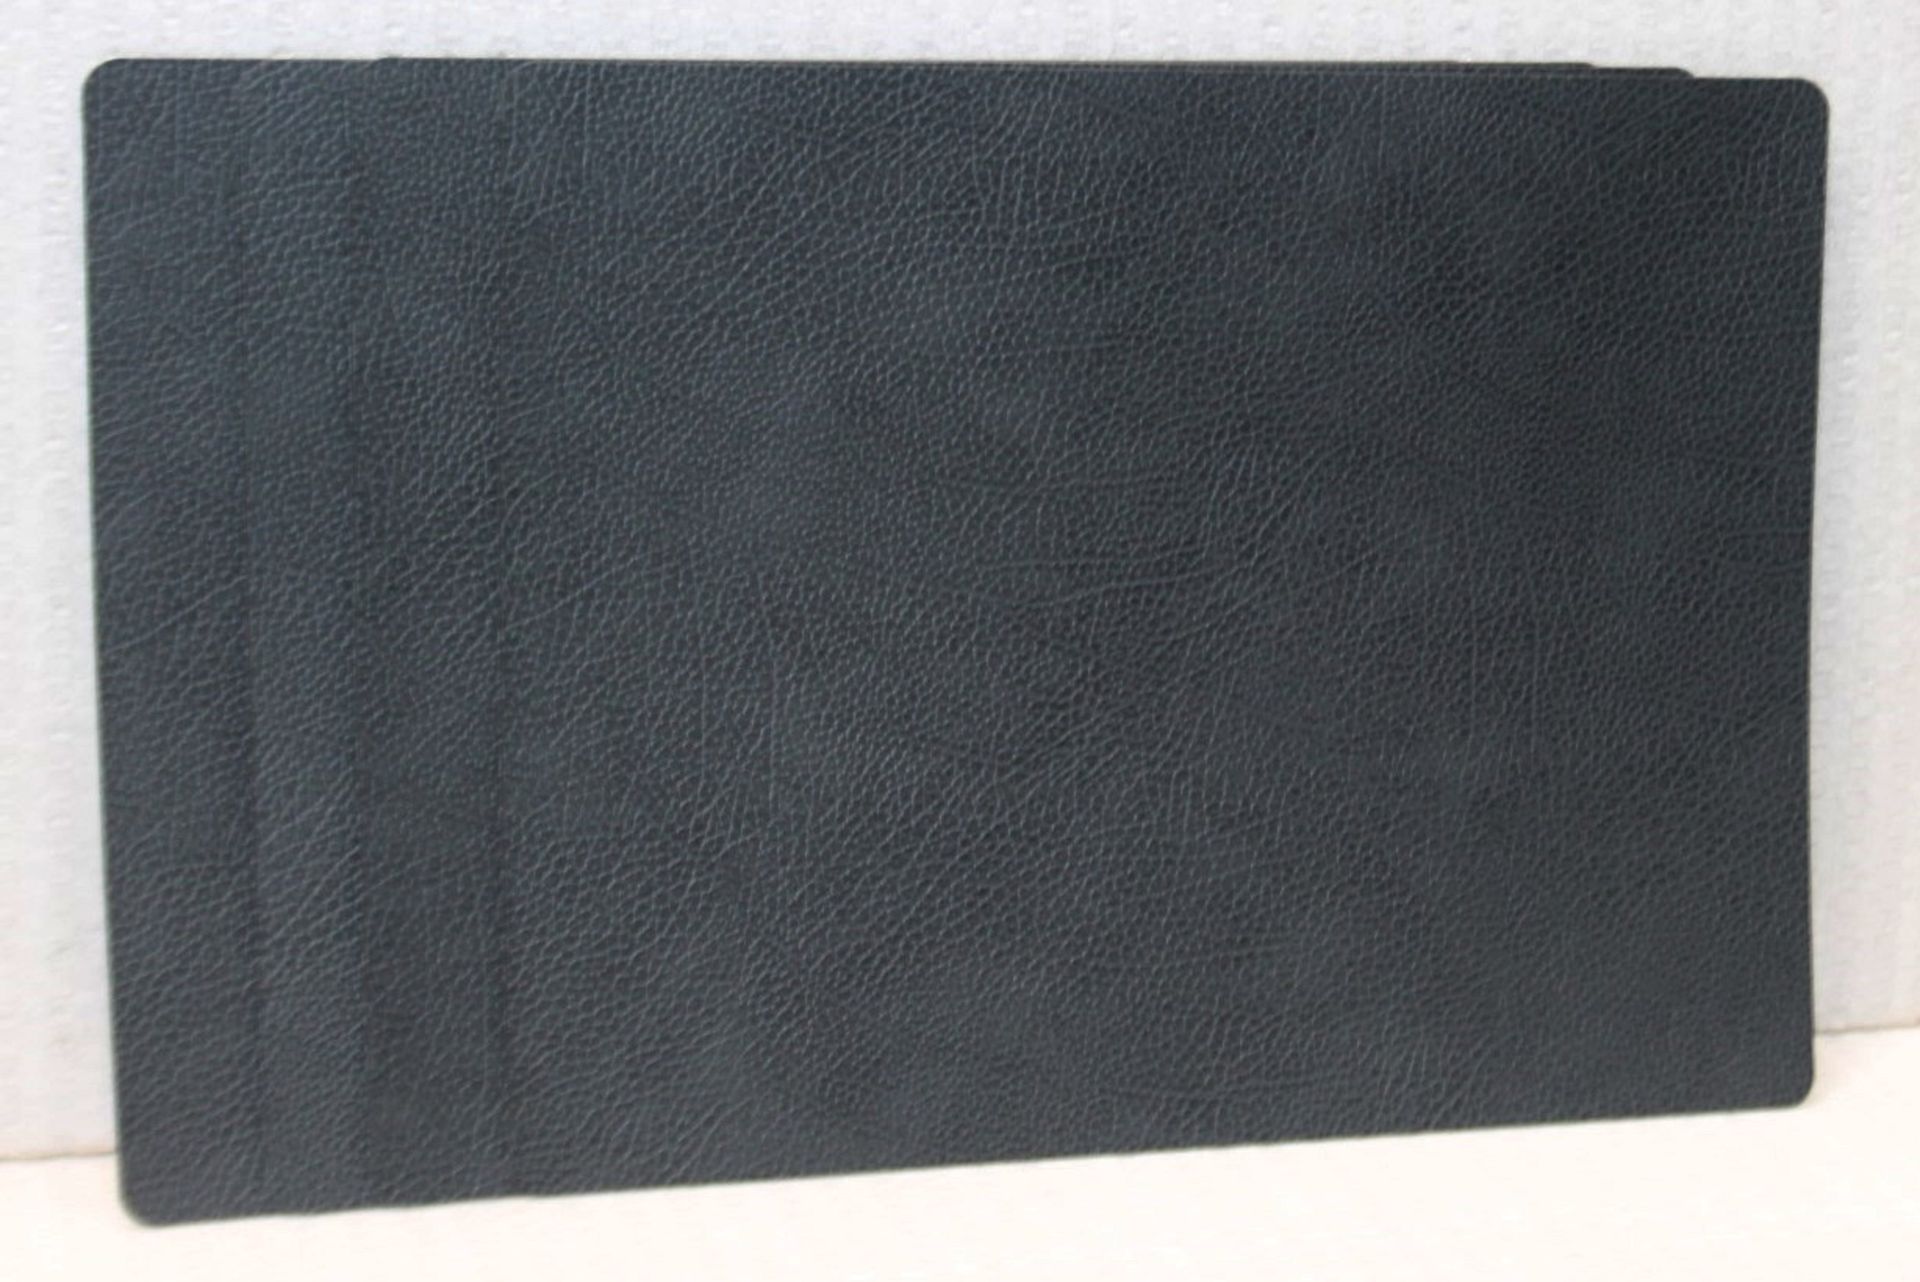 Set of 4 x LIND DNA 'Hippo' Leather Square Placemats Table Mats, In Black - Original Price £72.95 - Image 7 of 9